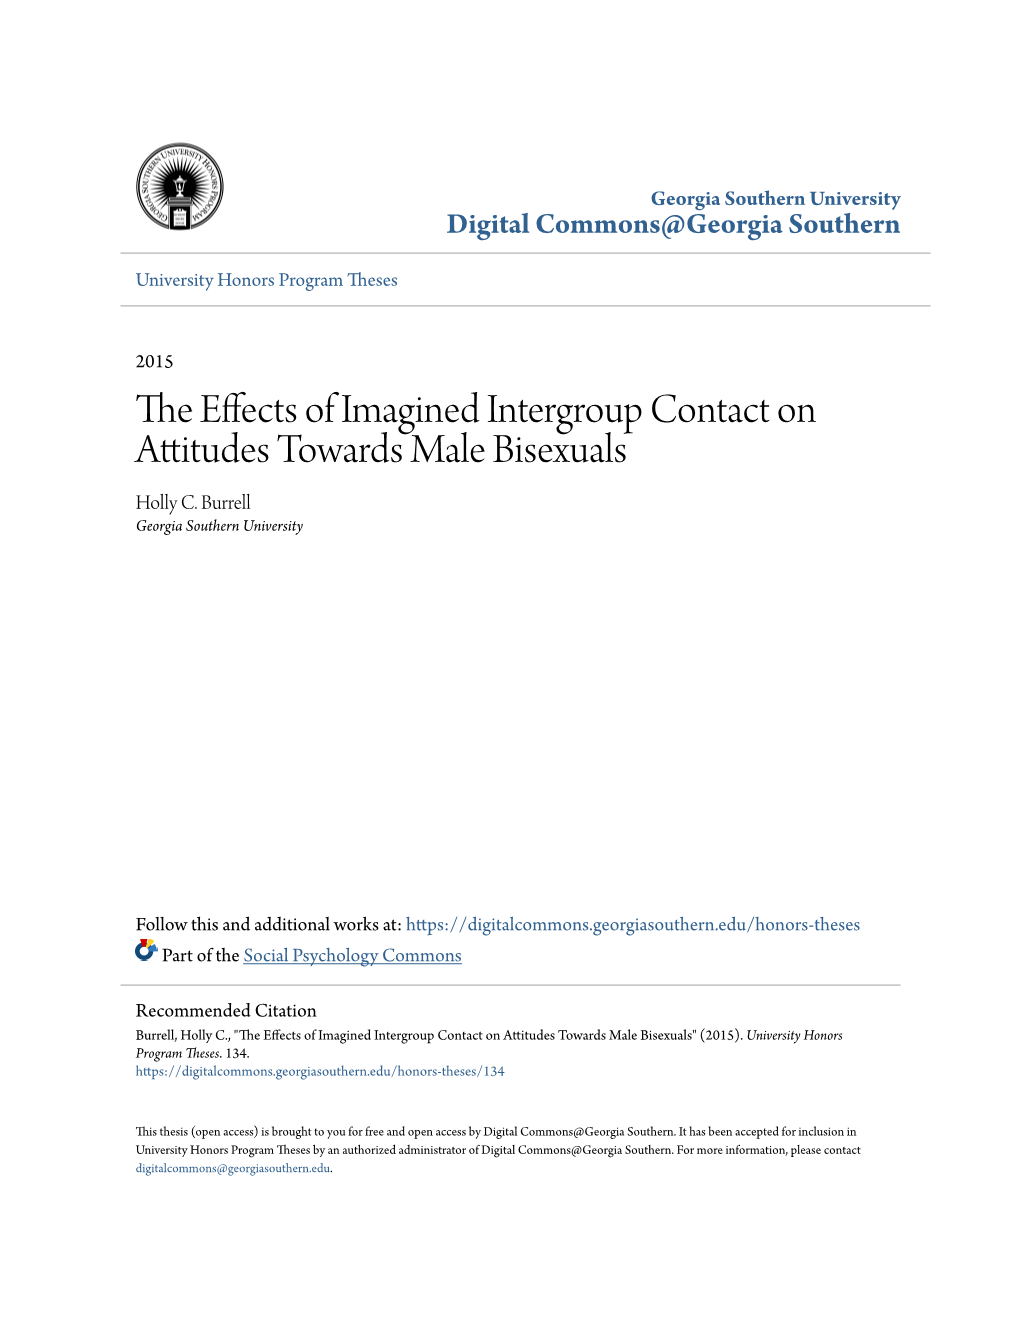 The Effects of Imagined Intergroup Contact on Attitudes Towards Male Bisexuals" (2015)